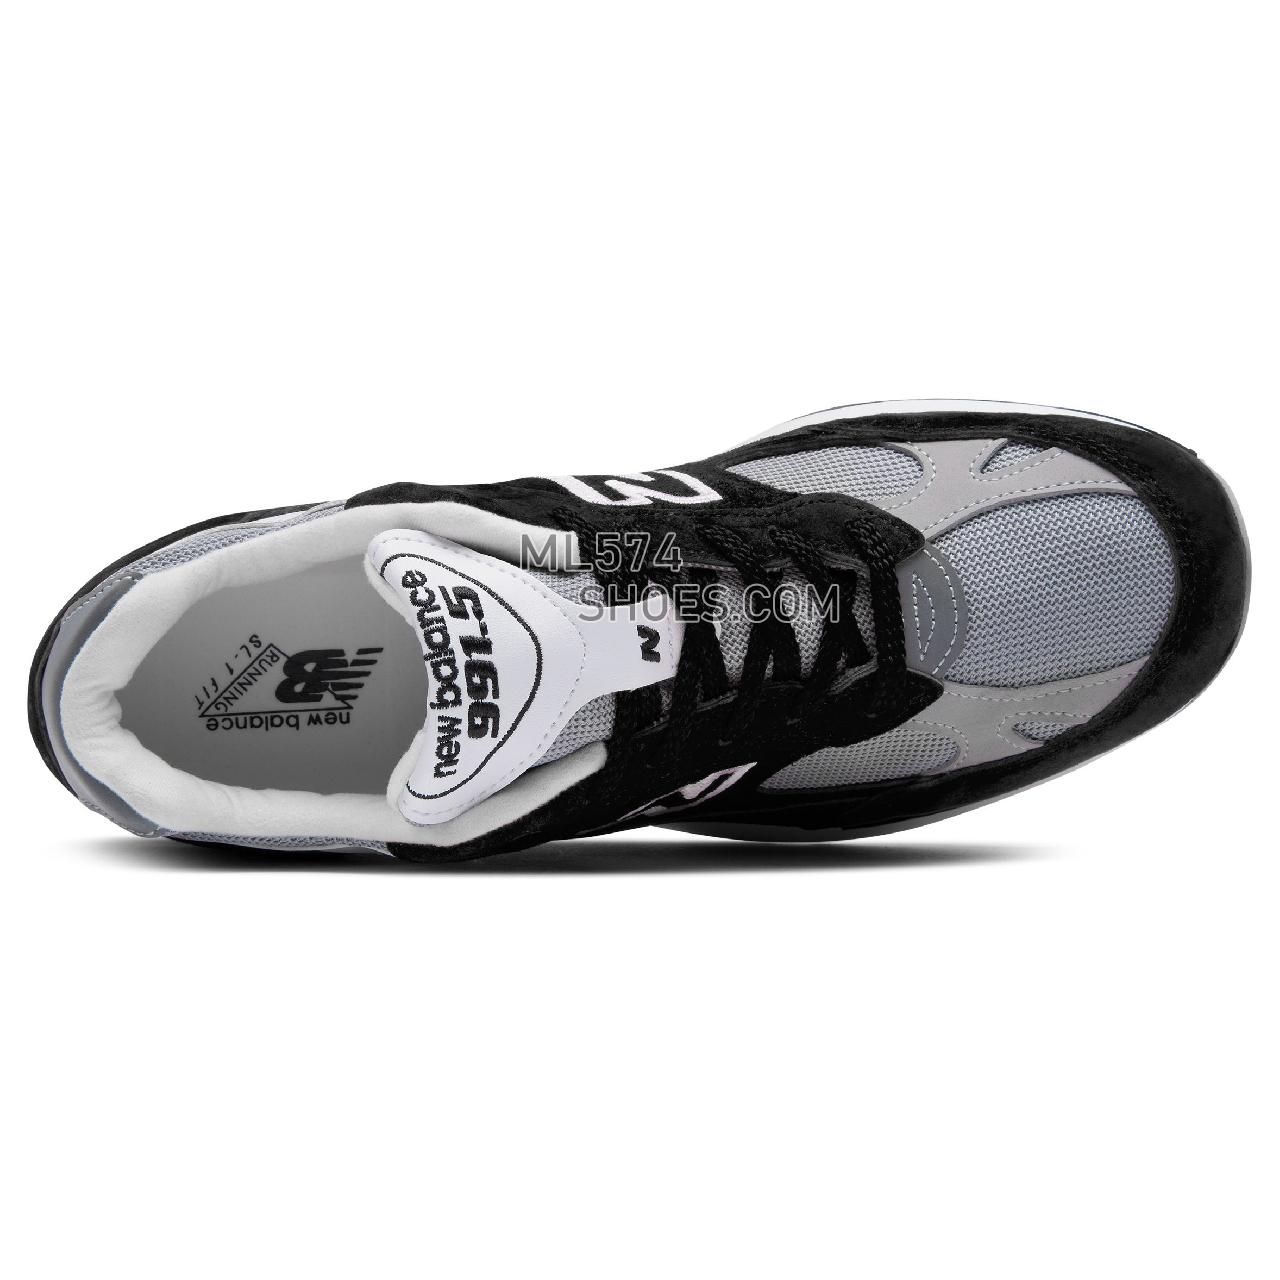 New Balance 991.5 Made in UK - Men's 9915 - Classic Black with Grey and White - M9915BB